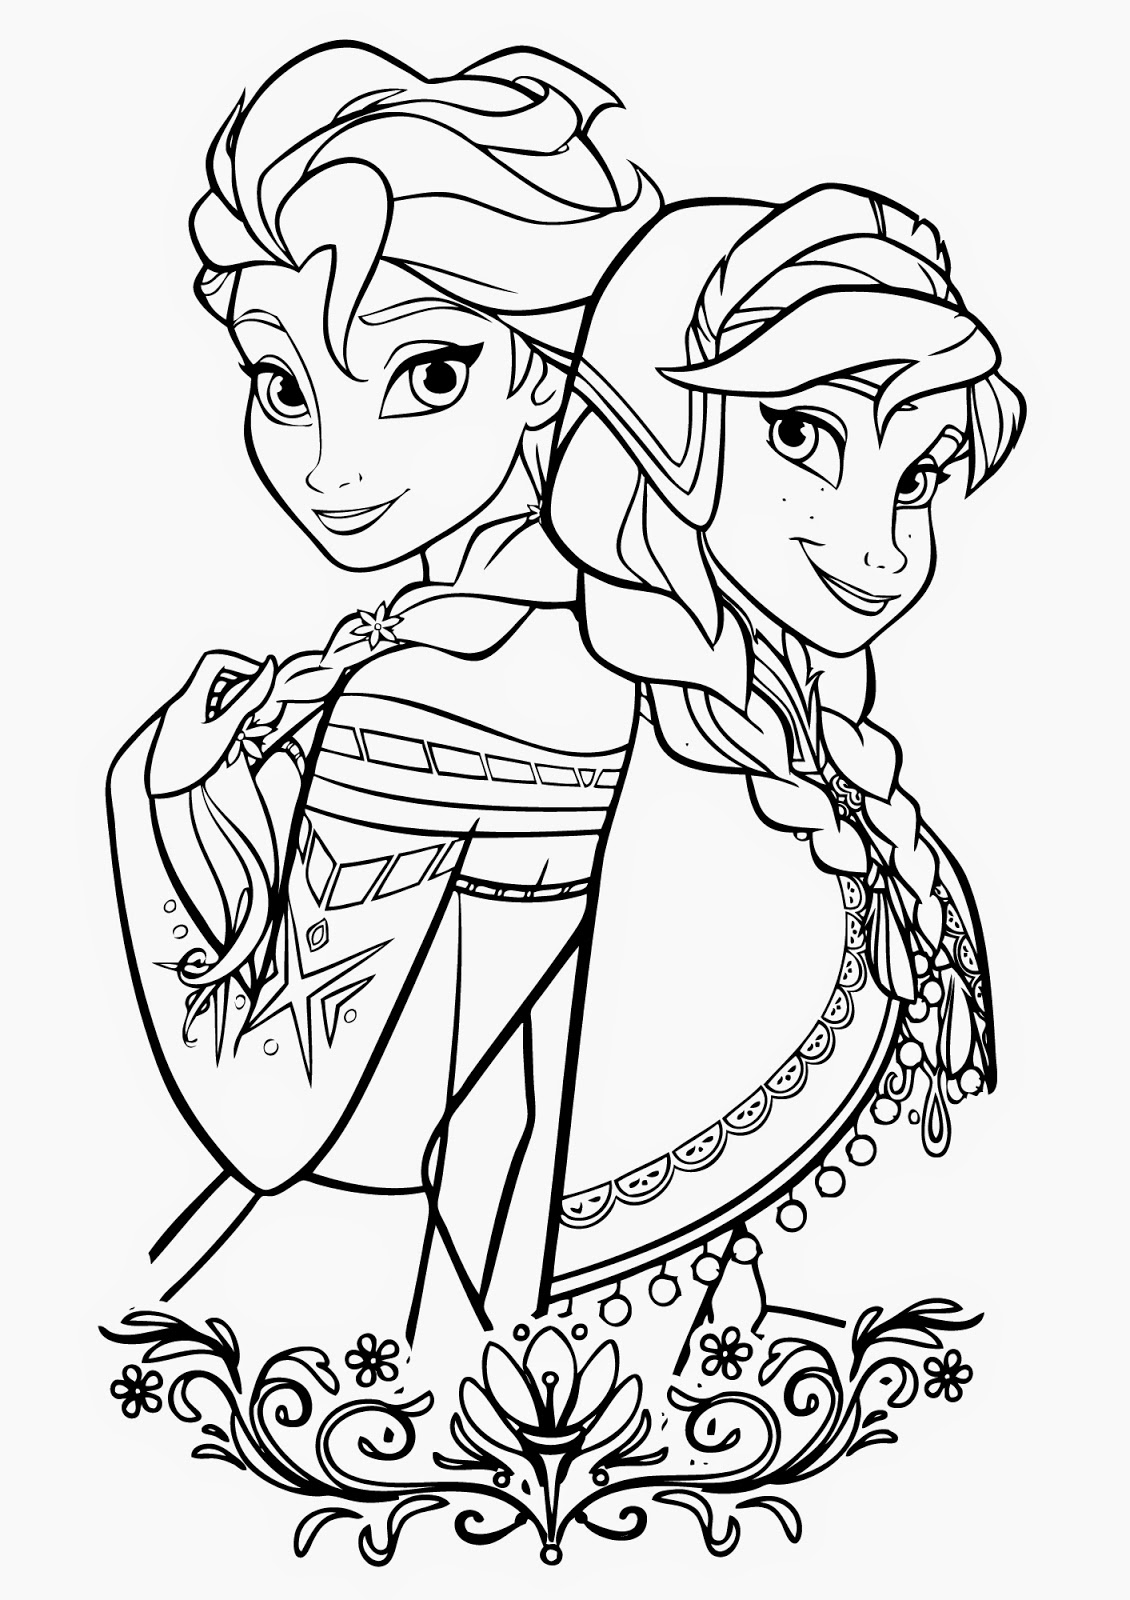 disney frozen coloring pages coloring page world frozen portrait coloring disney pages frozen 